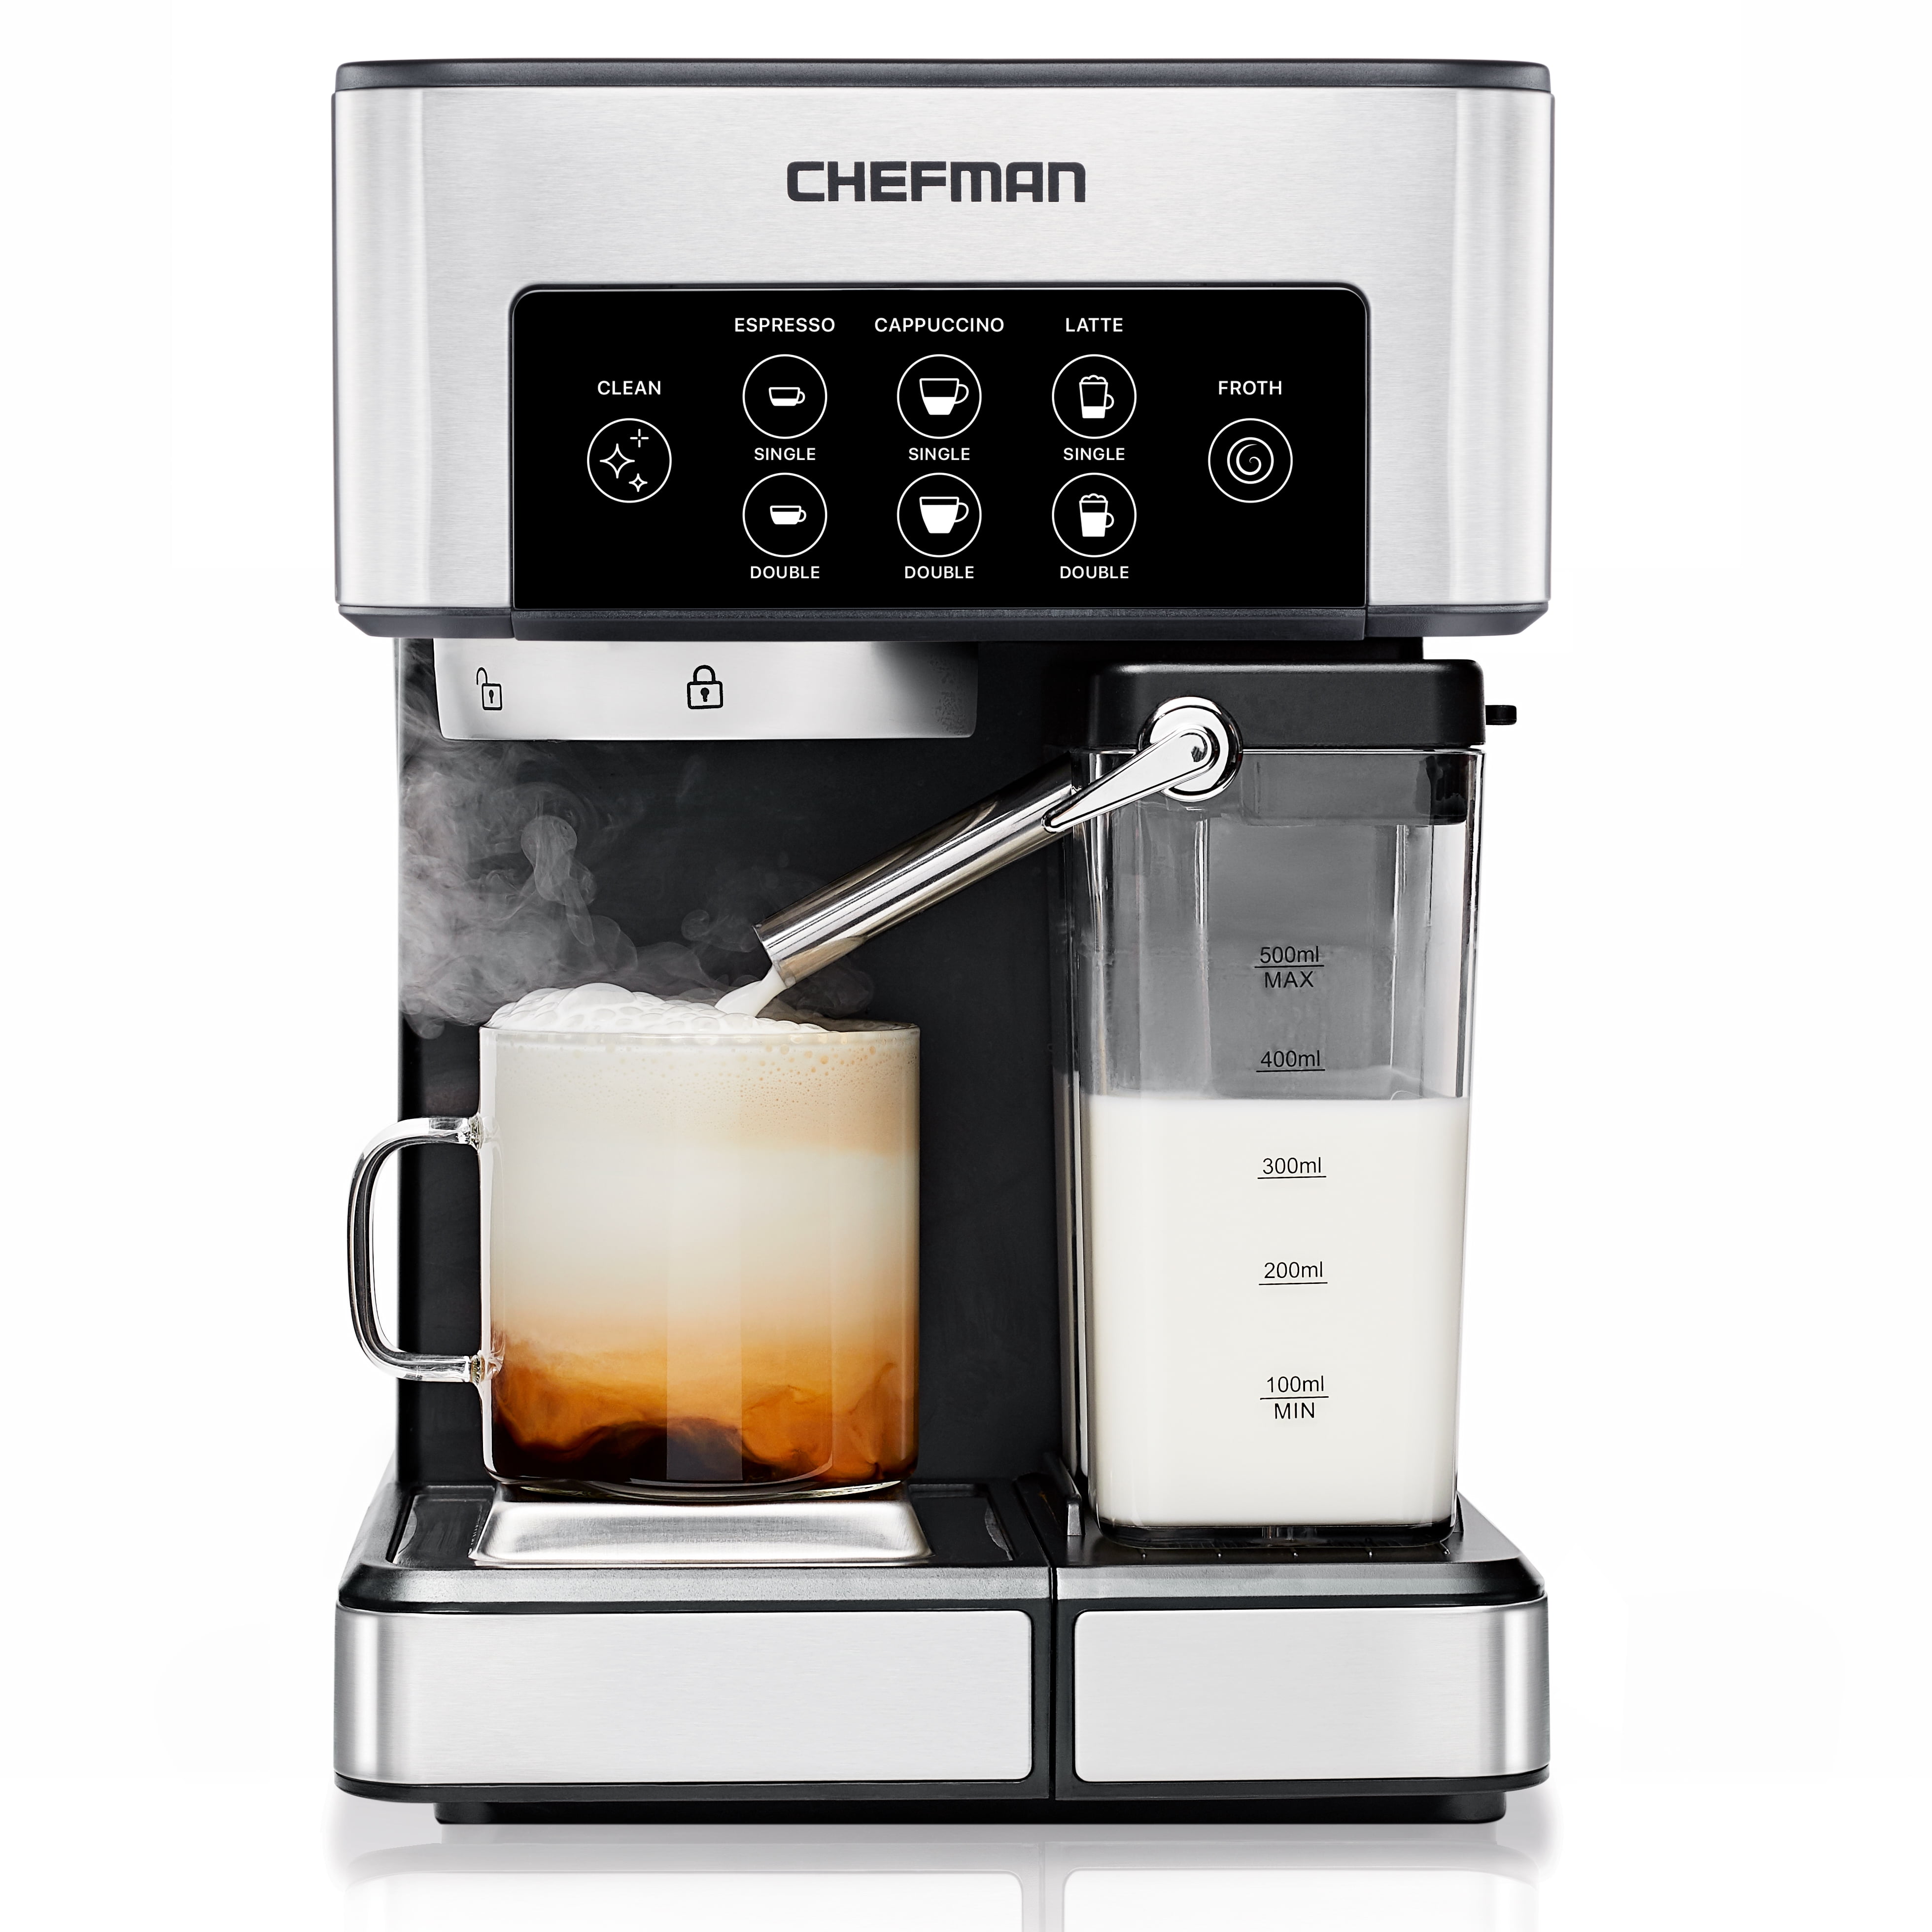 Chefman 1.8L Pro Espresso, Cappuccino and Latte Machine with Milk Frother, Stainless - Walmart.com